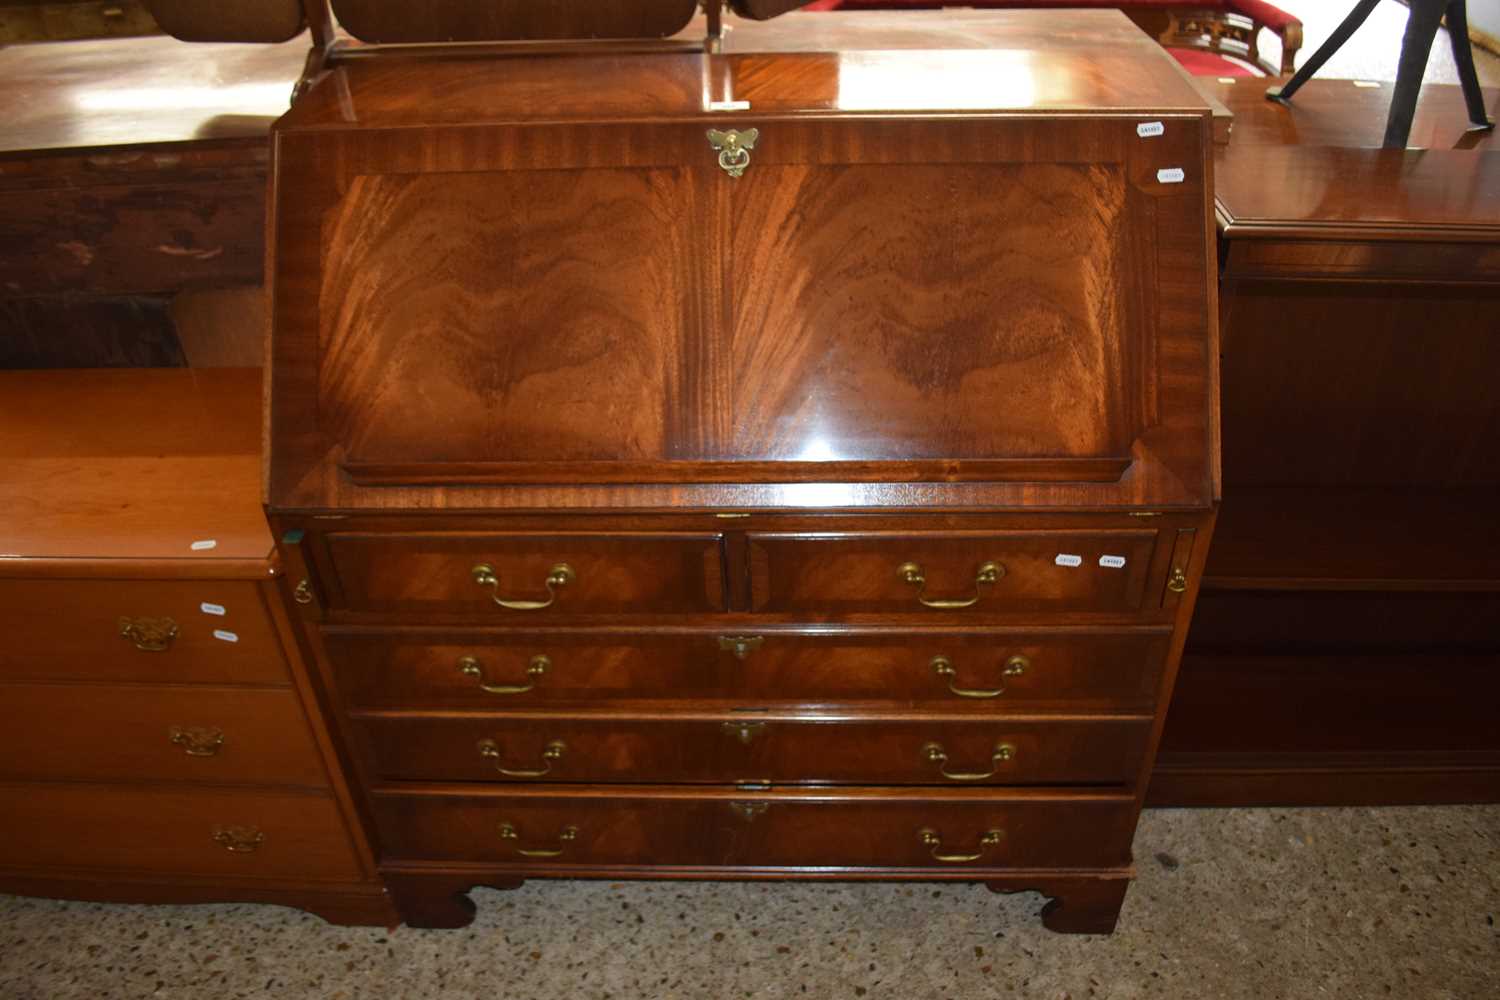 Good quality reproduction mahogany bureau by Bevan & Funnell